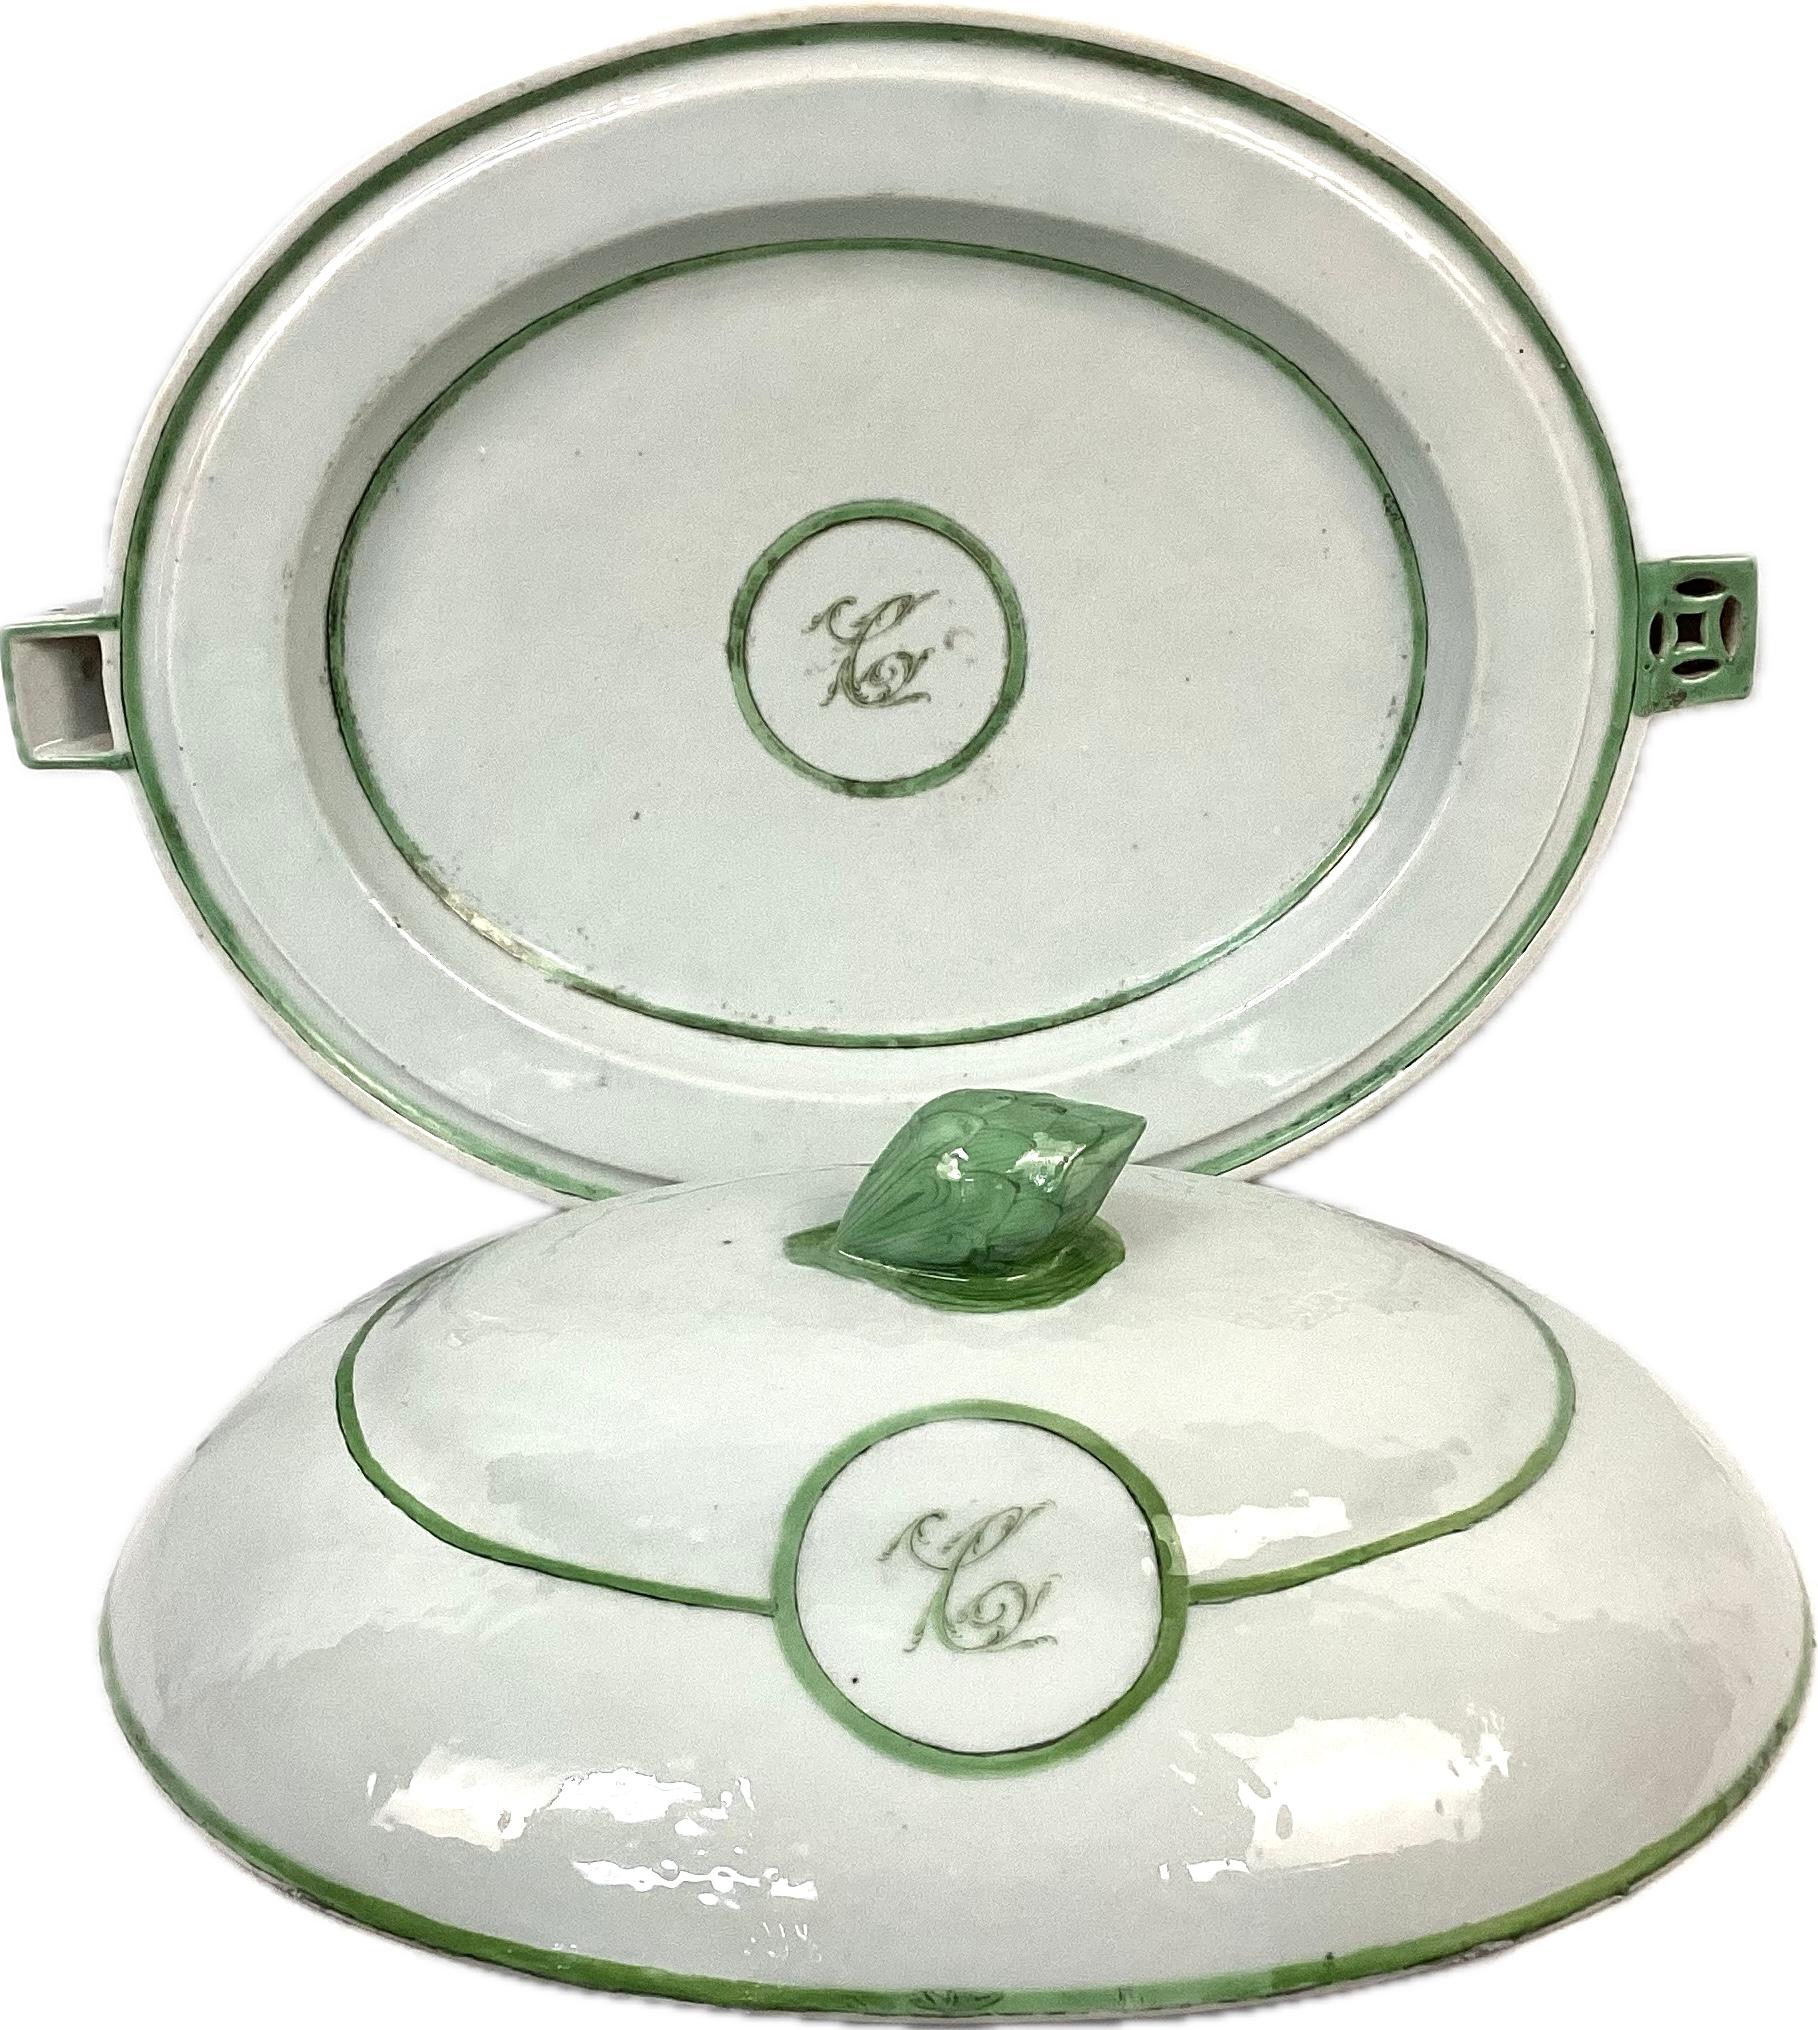 Rare find! Large 19th century Chinese Export porcelain warming dish with lid. Lid has a green porcelain artichoke handle. Beautiful colors of green and white with green florals and the monogram 